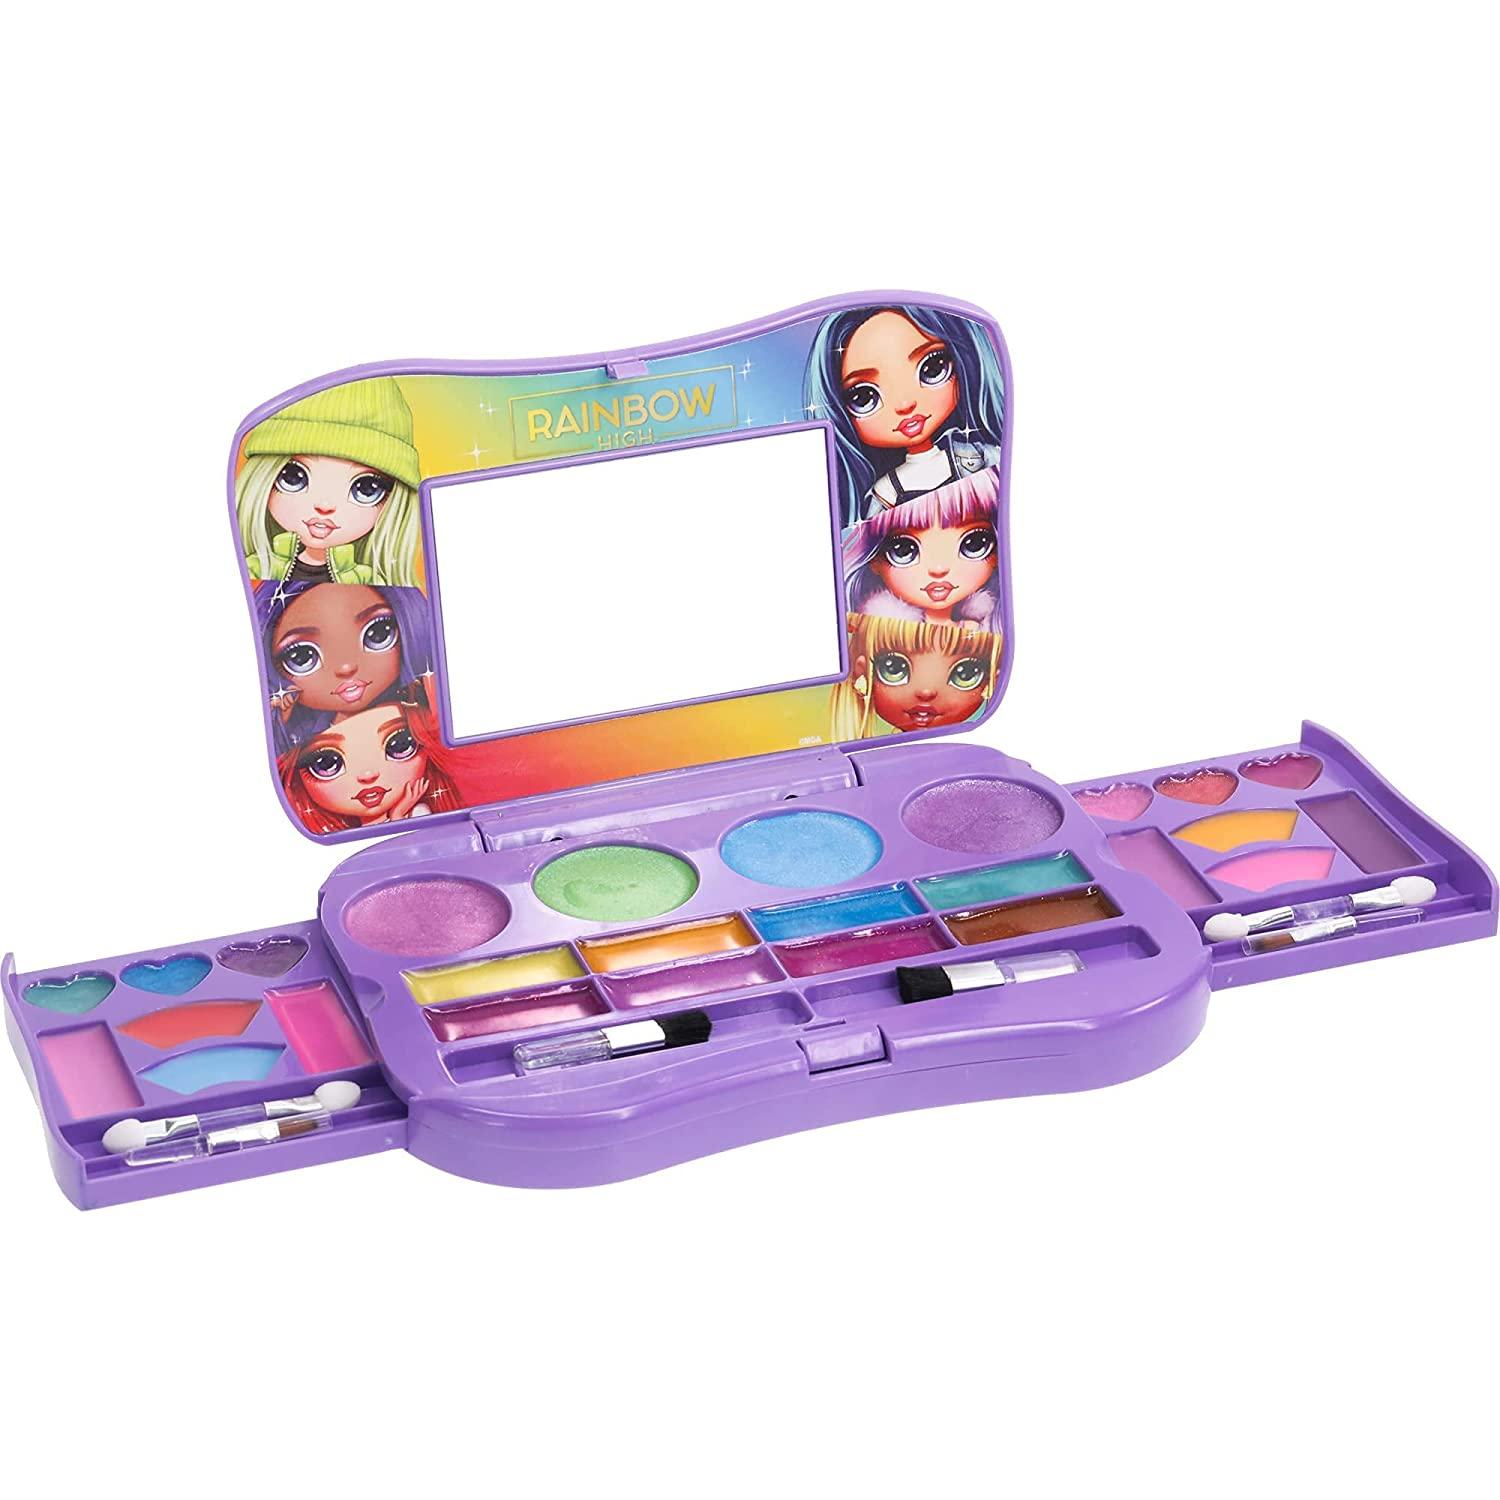 Kids' Cosmetics Makeup Set Toy For Girls, Princess Style Cosmetic Box With  Nail Polish And Peelable Makeup Toy, Purple